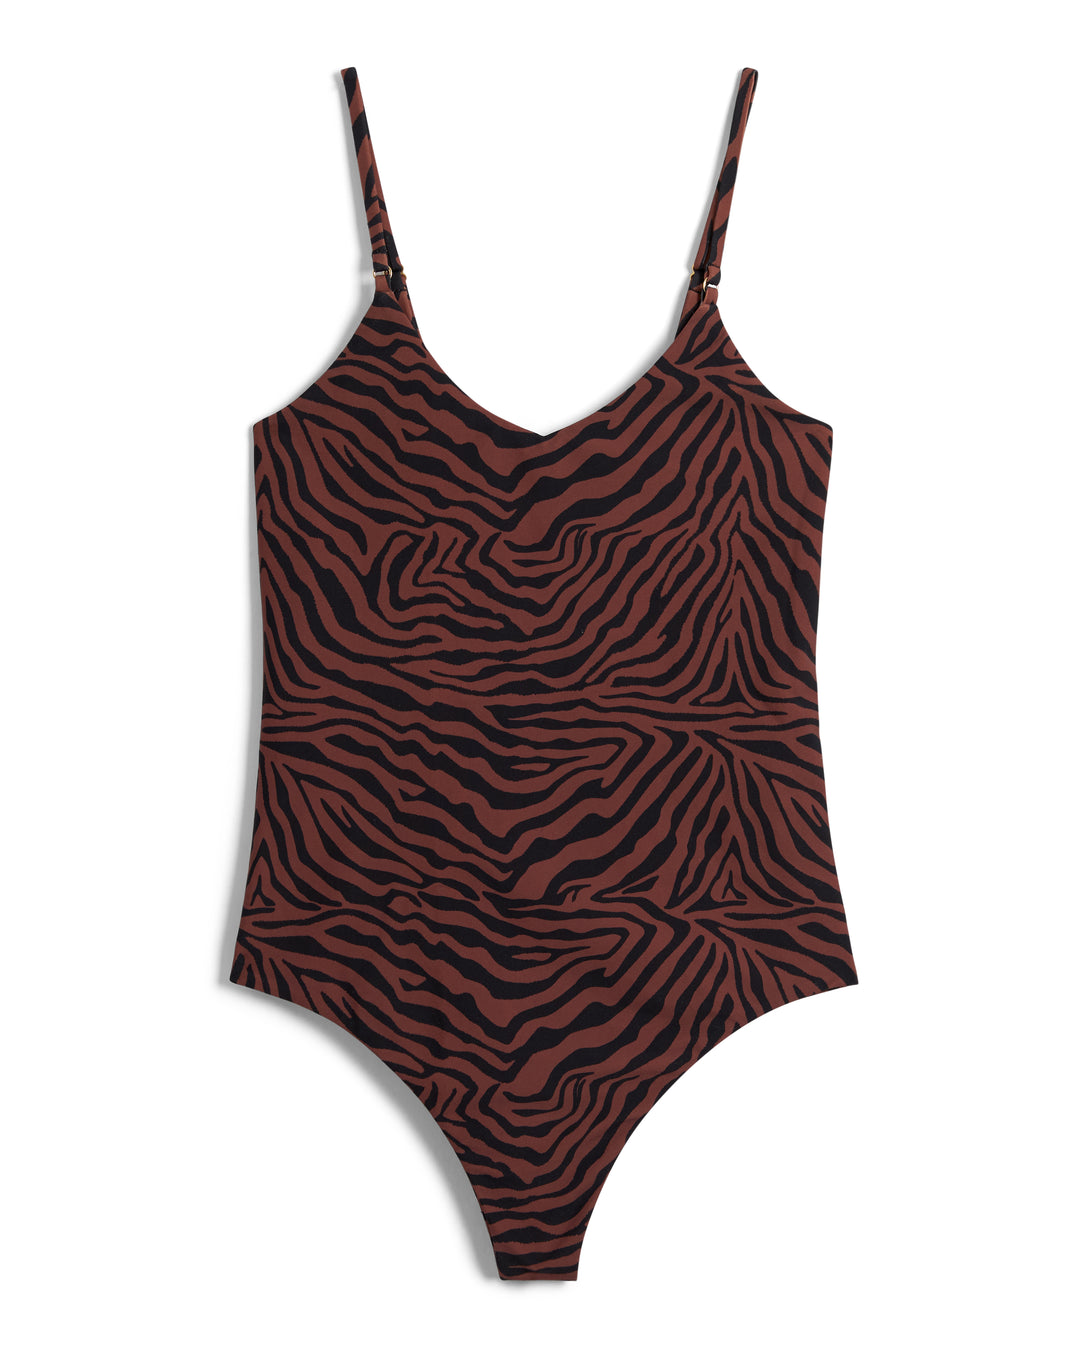 The Deia One Piece - Onyx by Dandy Del Mar features a striking brown and black zebra print design with spaghetti straps, seamlessly integrating into our women's swim collection. This stylish piece also boasts a high-cut design for an elongated silhouette.